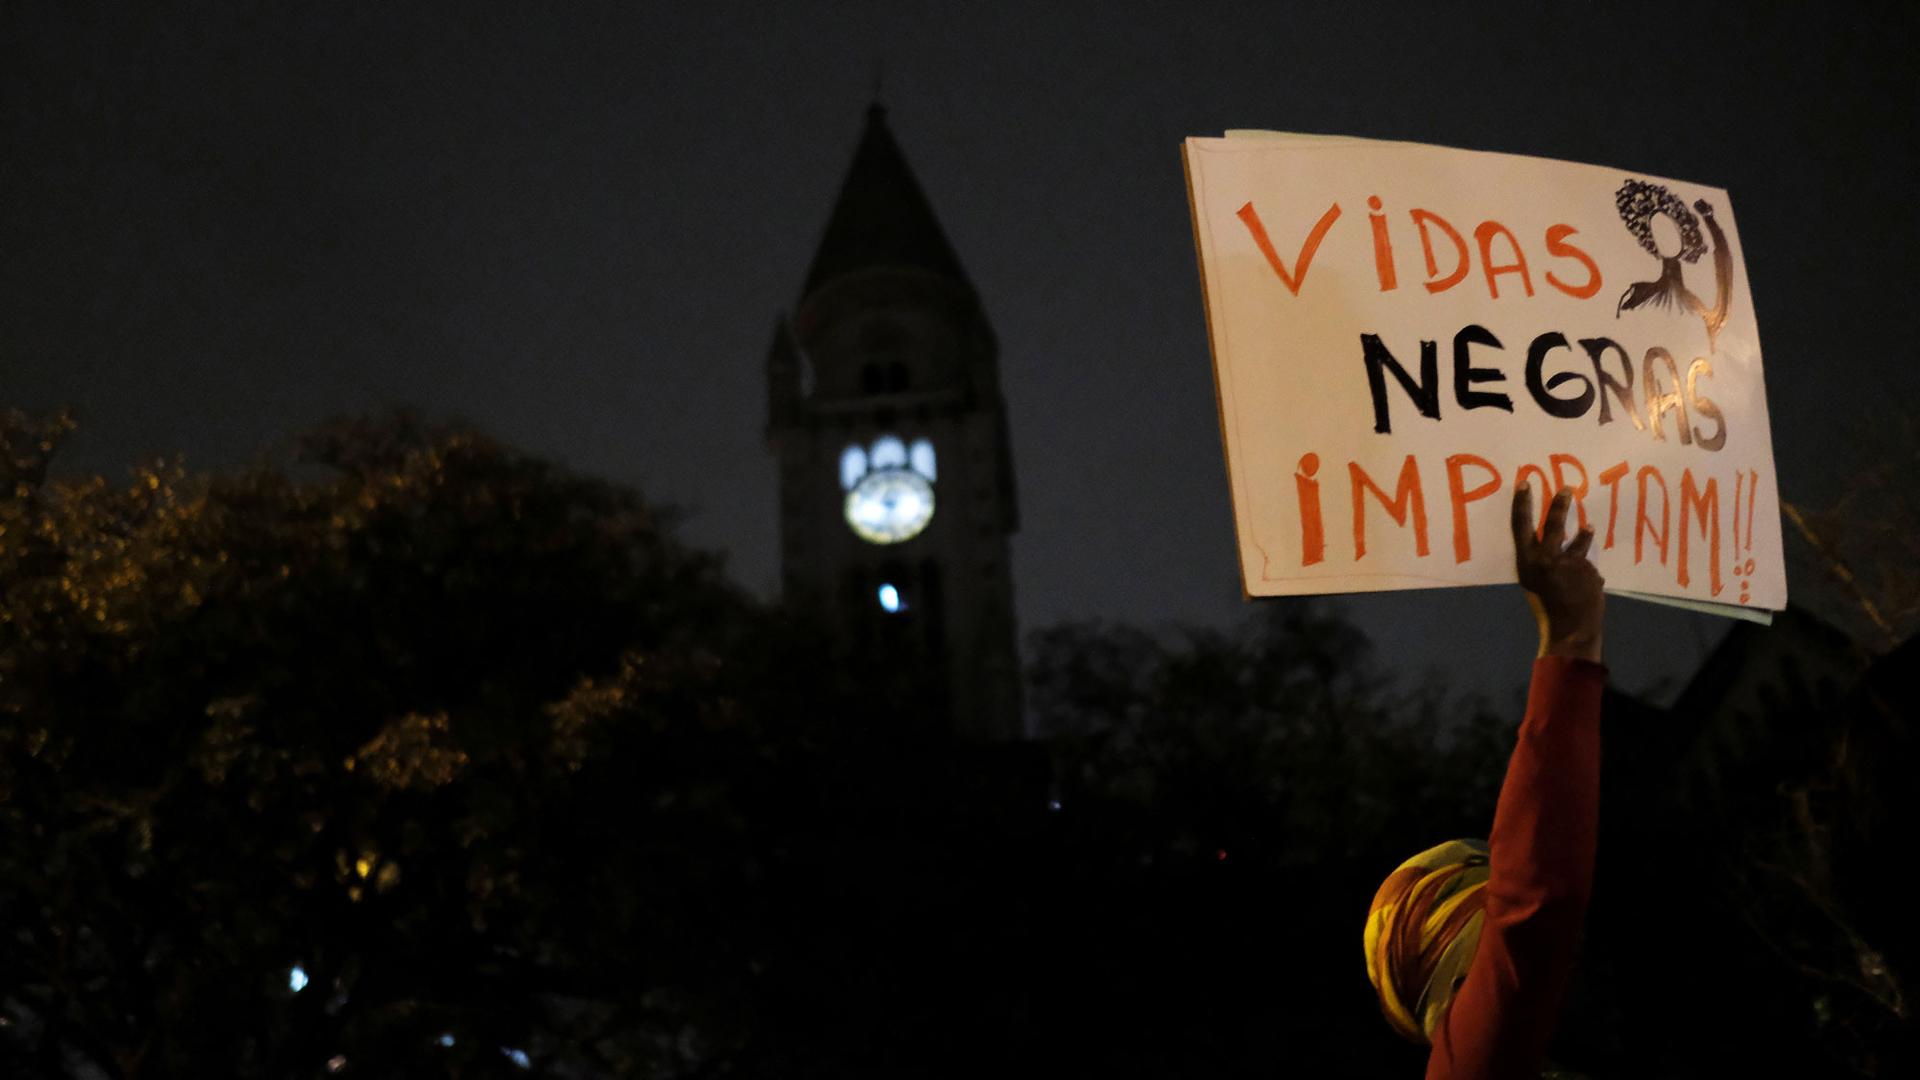 A demonstrator holds a sign reading "Black Lives Matter" in a dark photograph taken in low light.